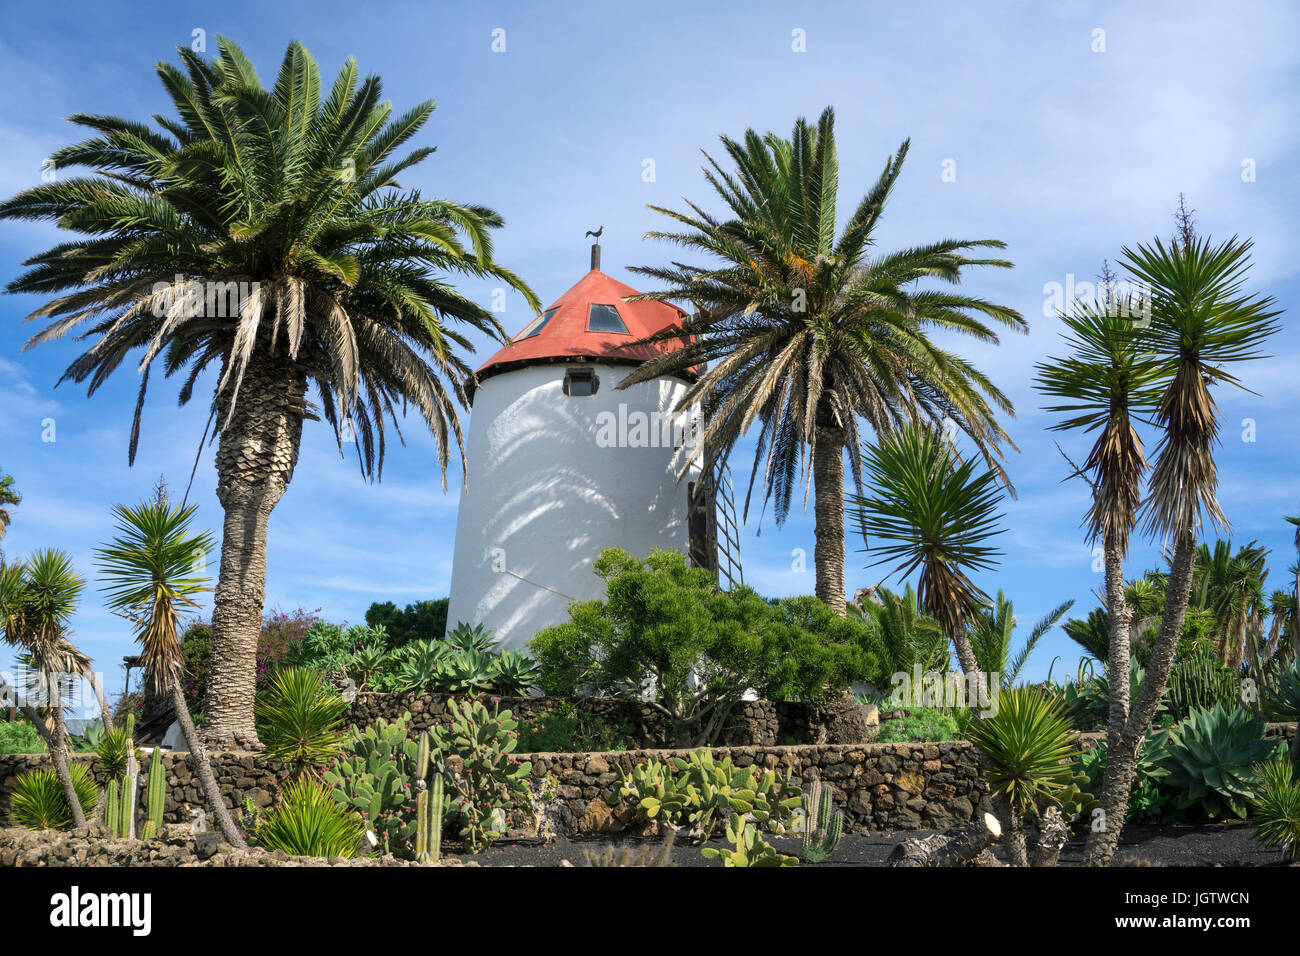 Windmill at agriculture museum Museo Agrícola El Patio, Tiagua, province Teguise, Lanzarote, Canary islands, Europe Stock Photo